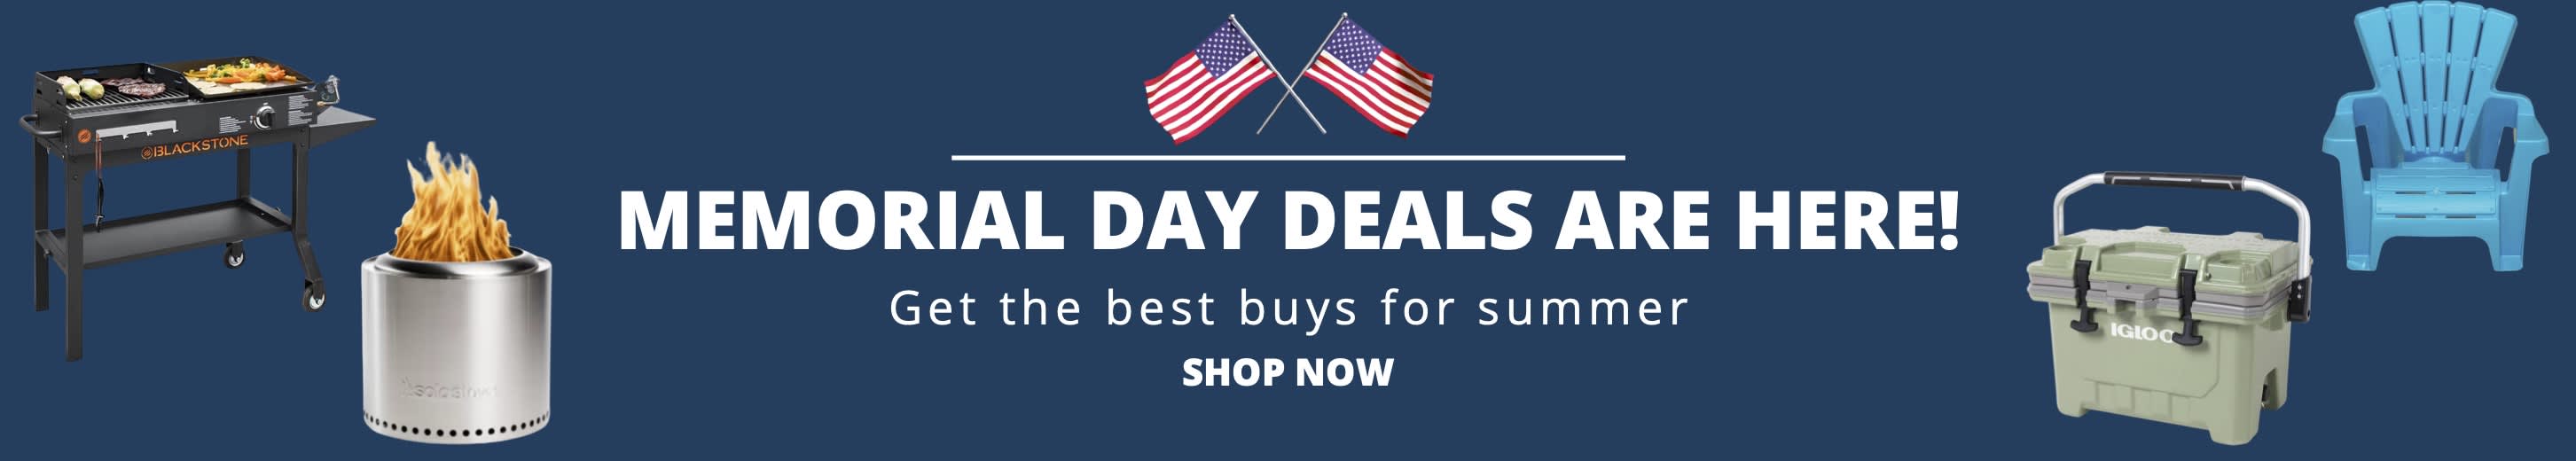 Memorial Day Deals Are Here. Shop Now!